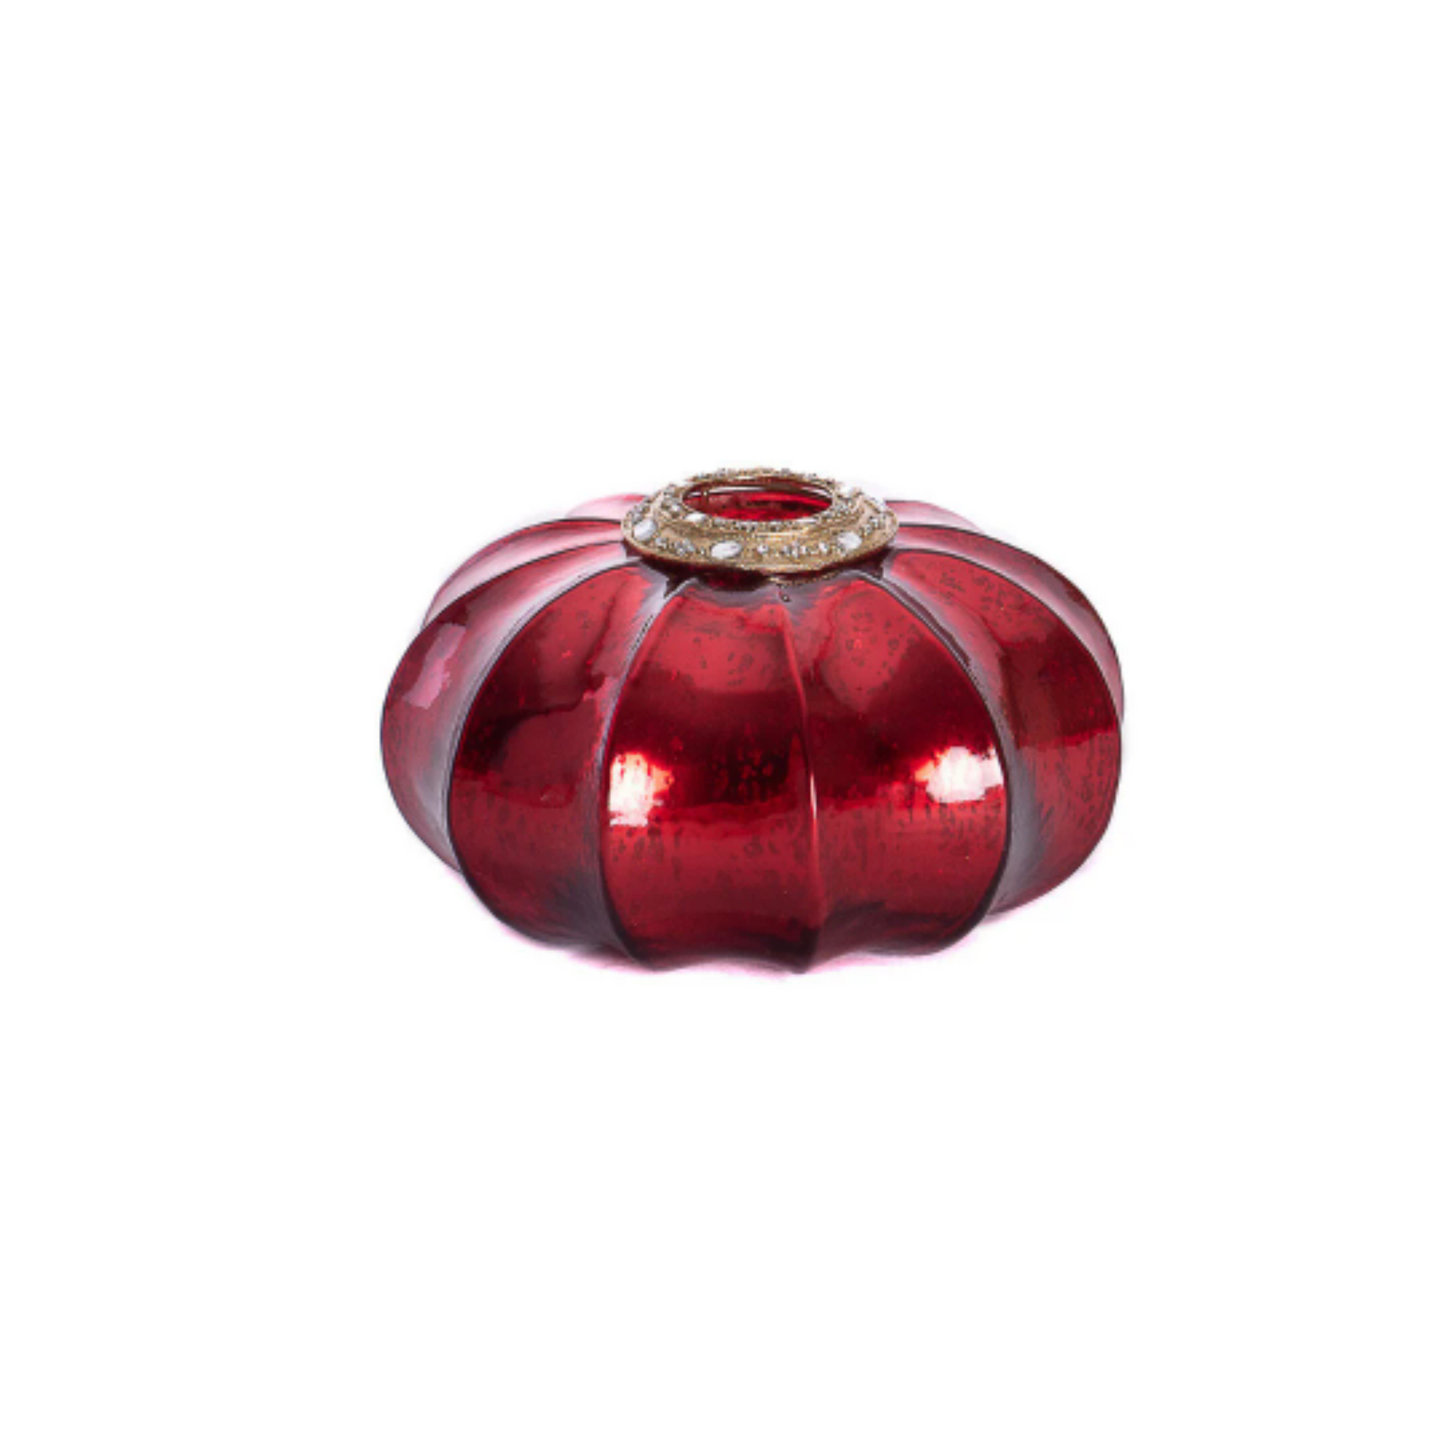 Tea Light Pumkin Holders available in Red, Silver and Gold